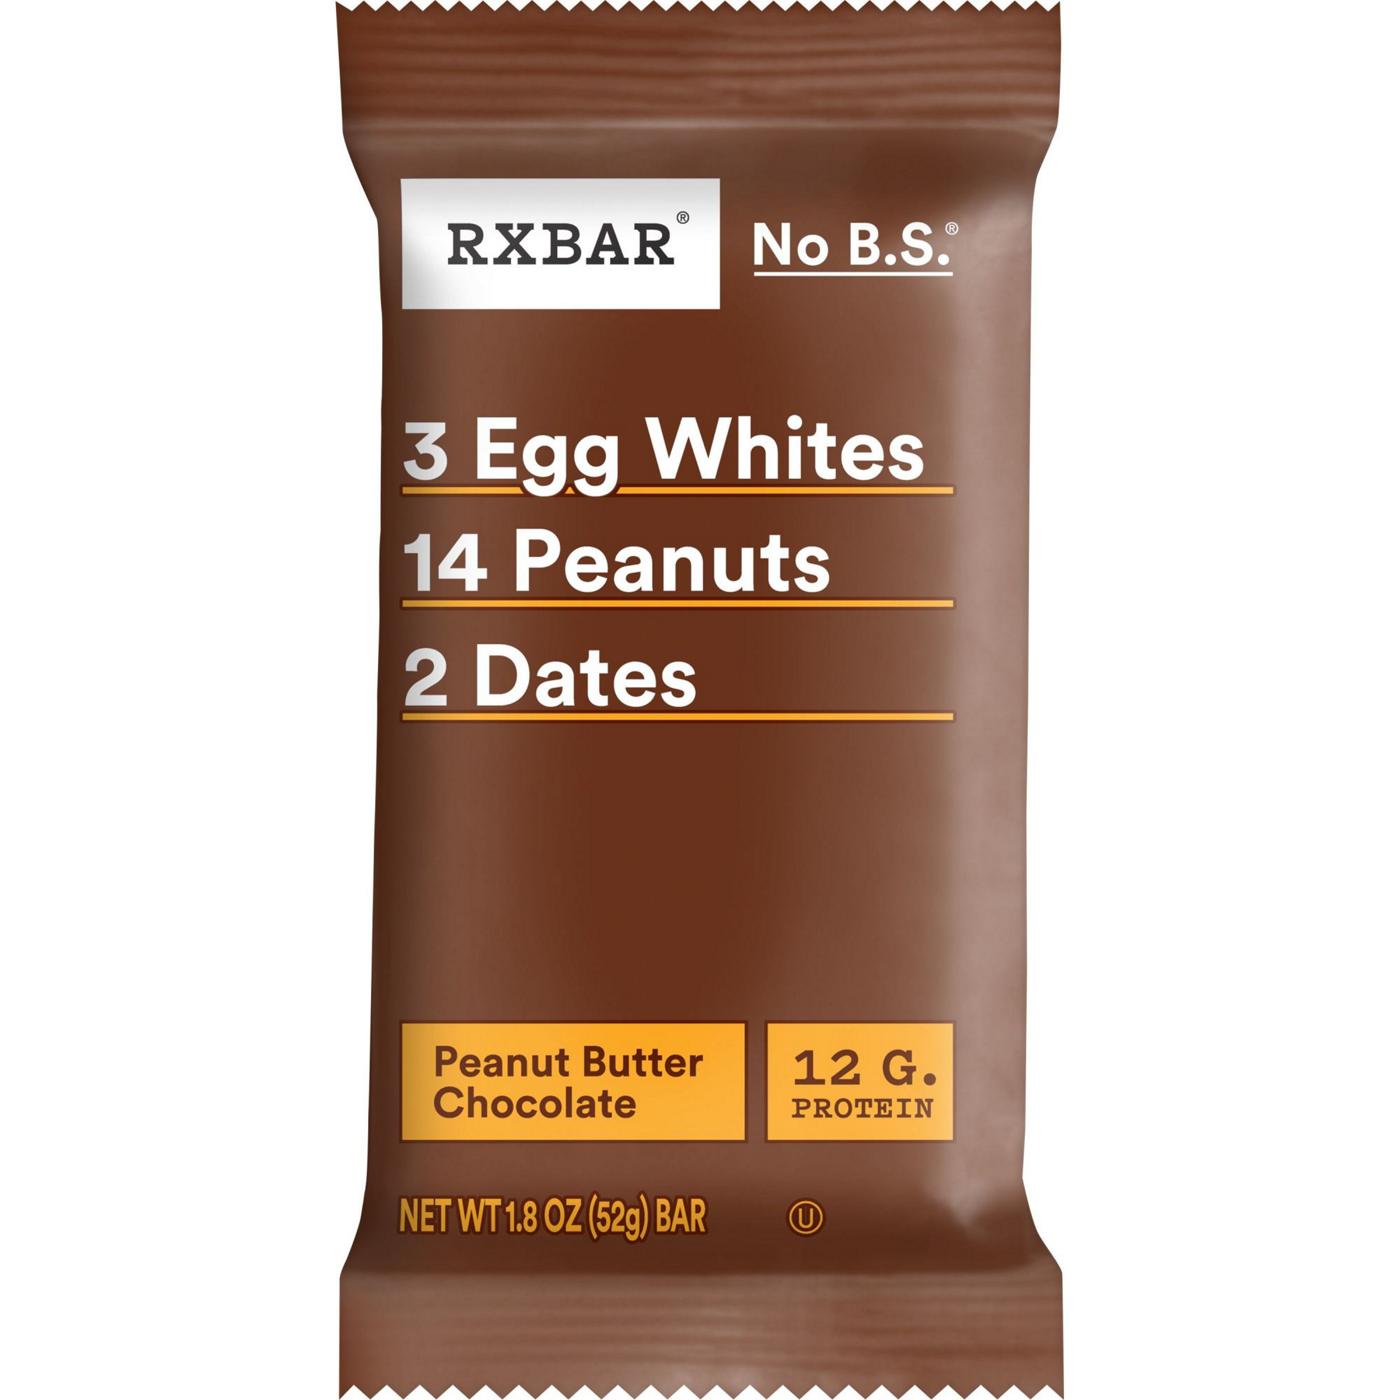 RXBAR Peanut Butter Chocolate Protein Bars; image 1 of 3